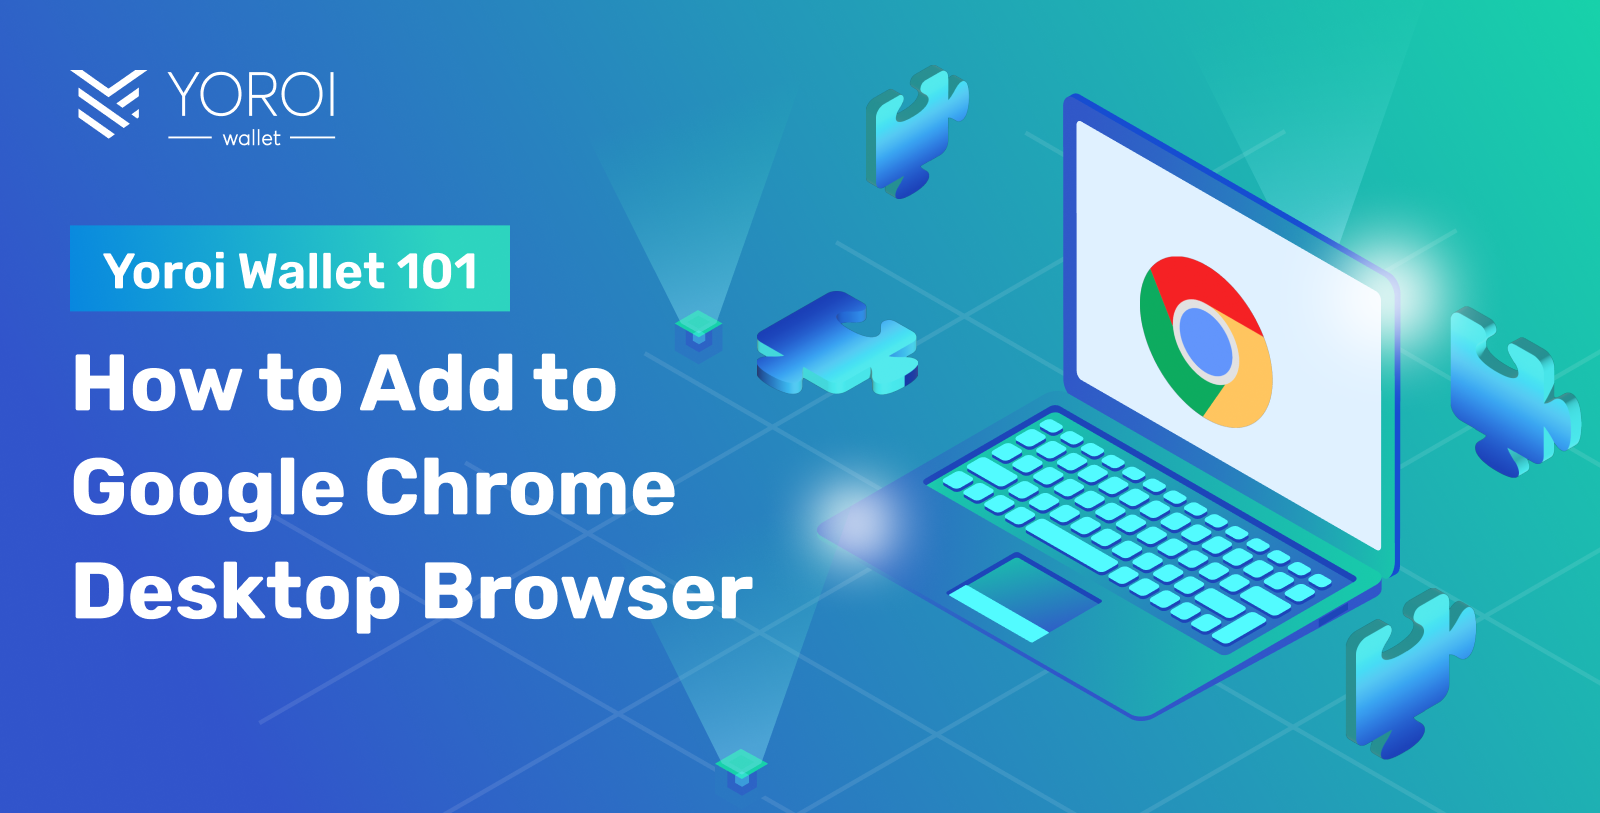 Yoroi-Wallet-101_-How-to-Add-to-Google-Chrome-Desktop-Browser.png